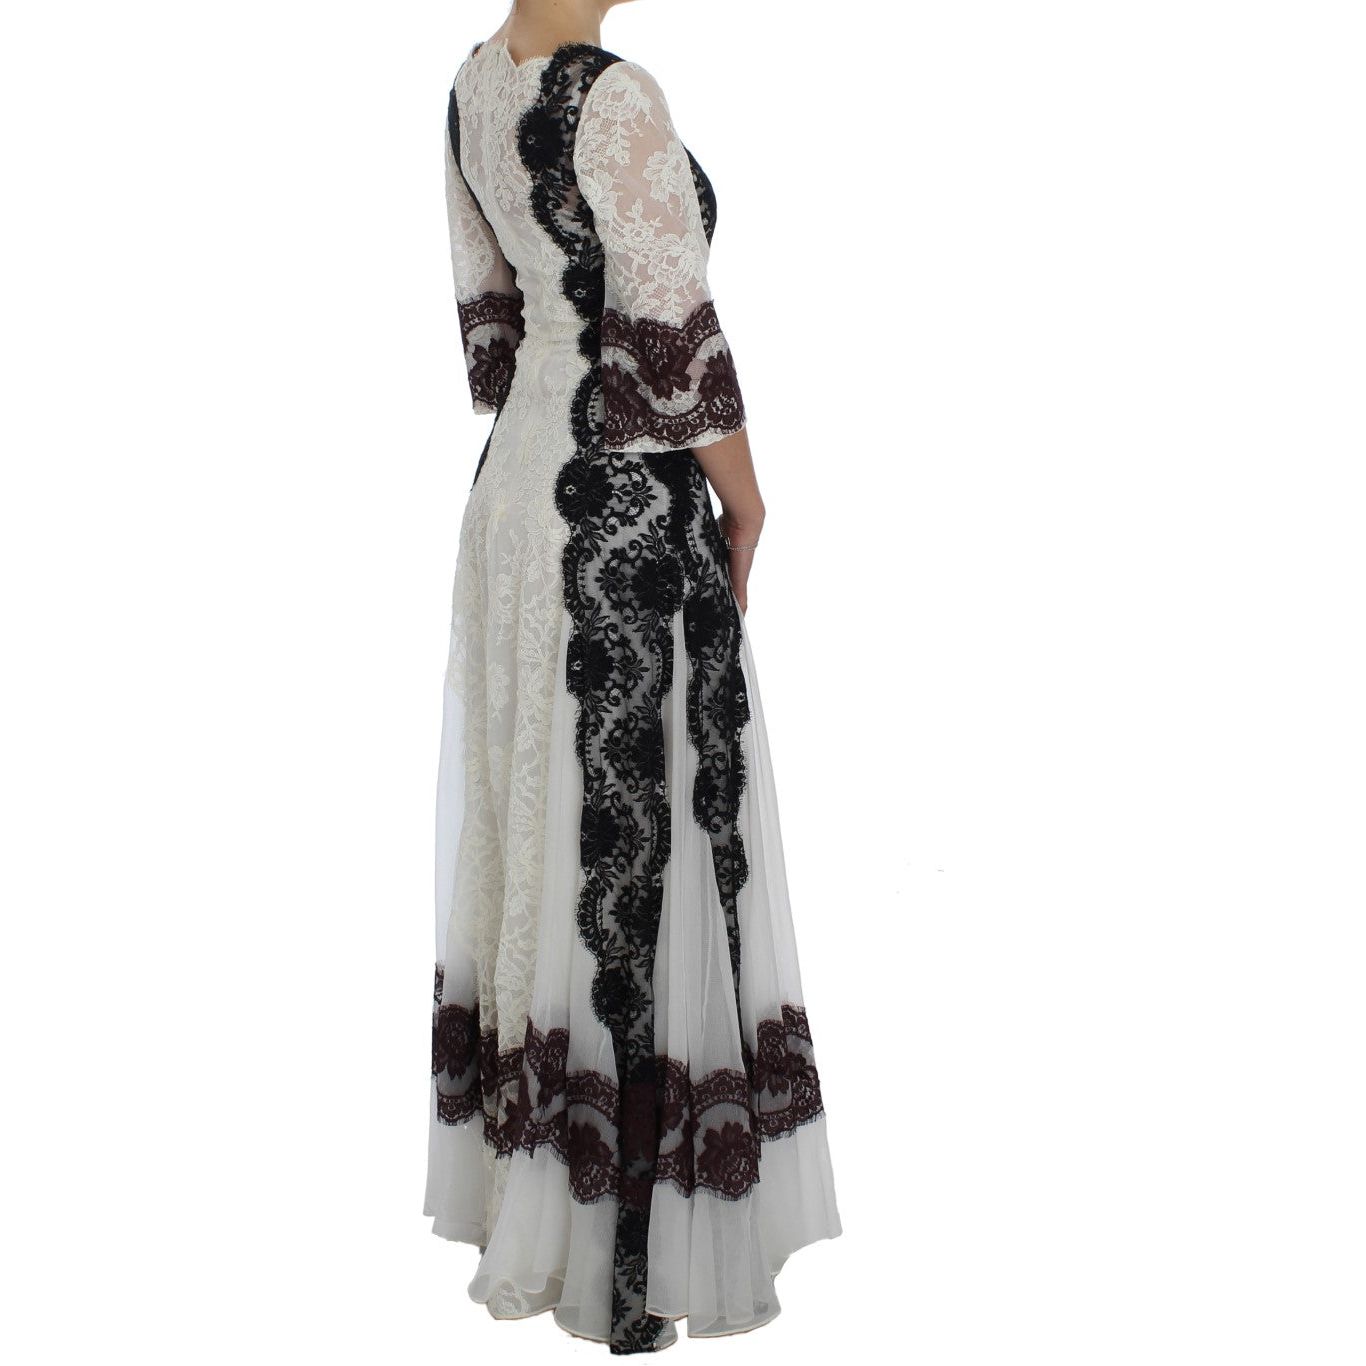 Dolce & Gabbana Floral Lace Silk Blend Maxi Dress white-floral-lace-full-length-gown-dress